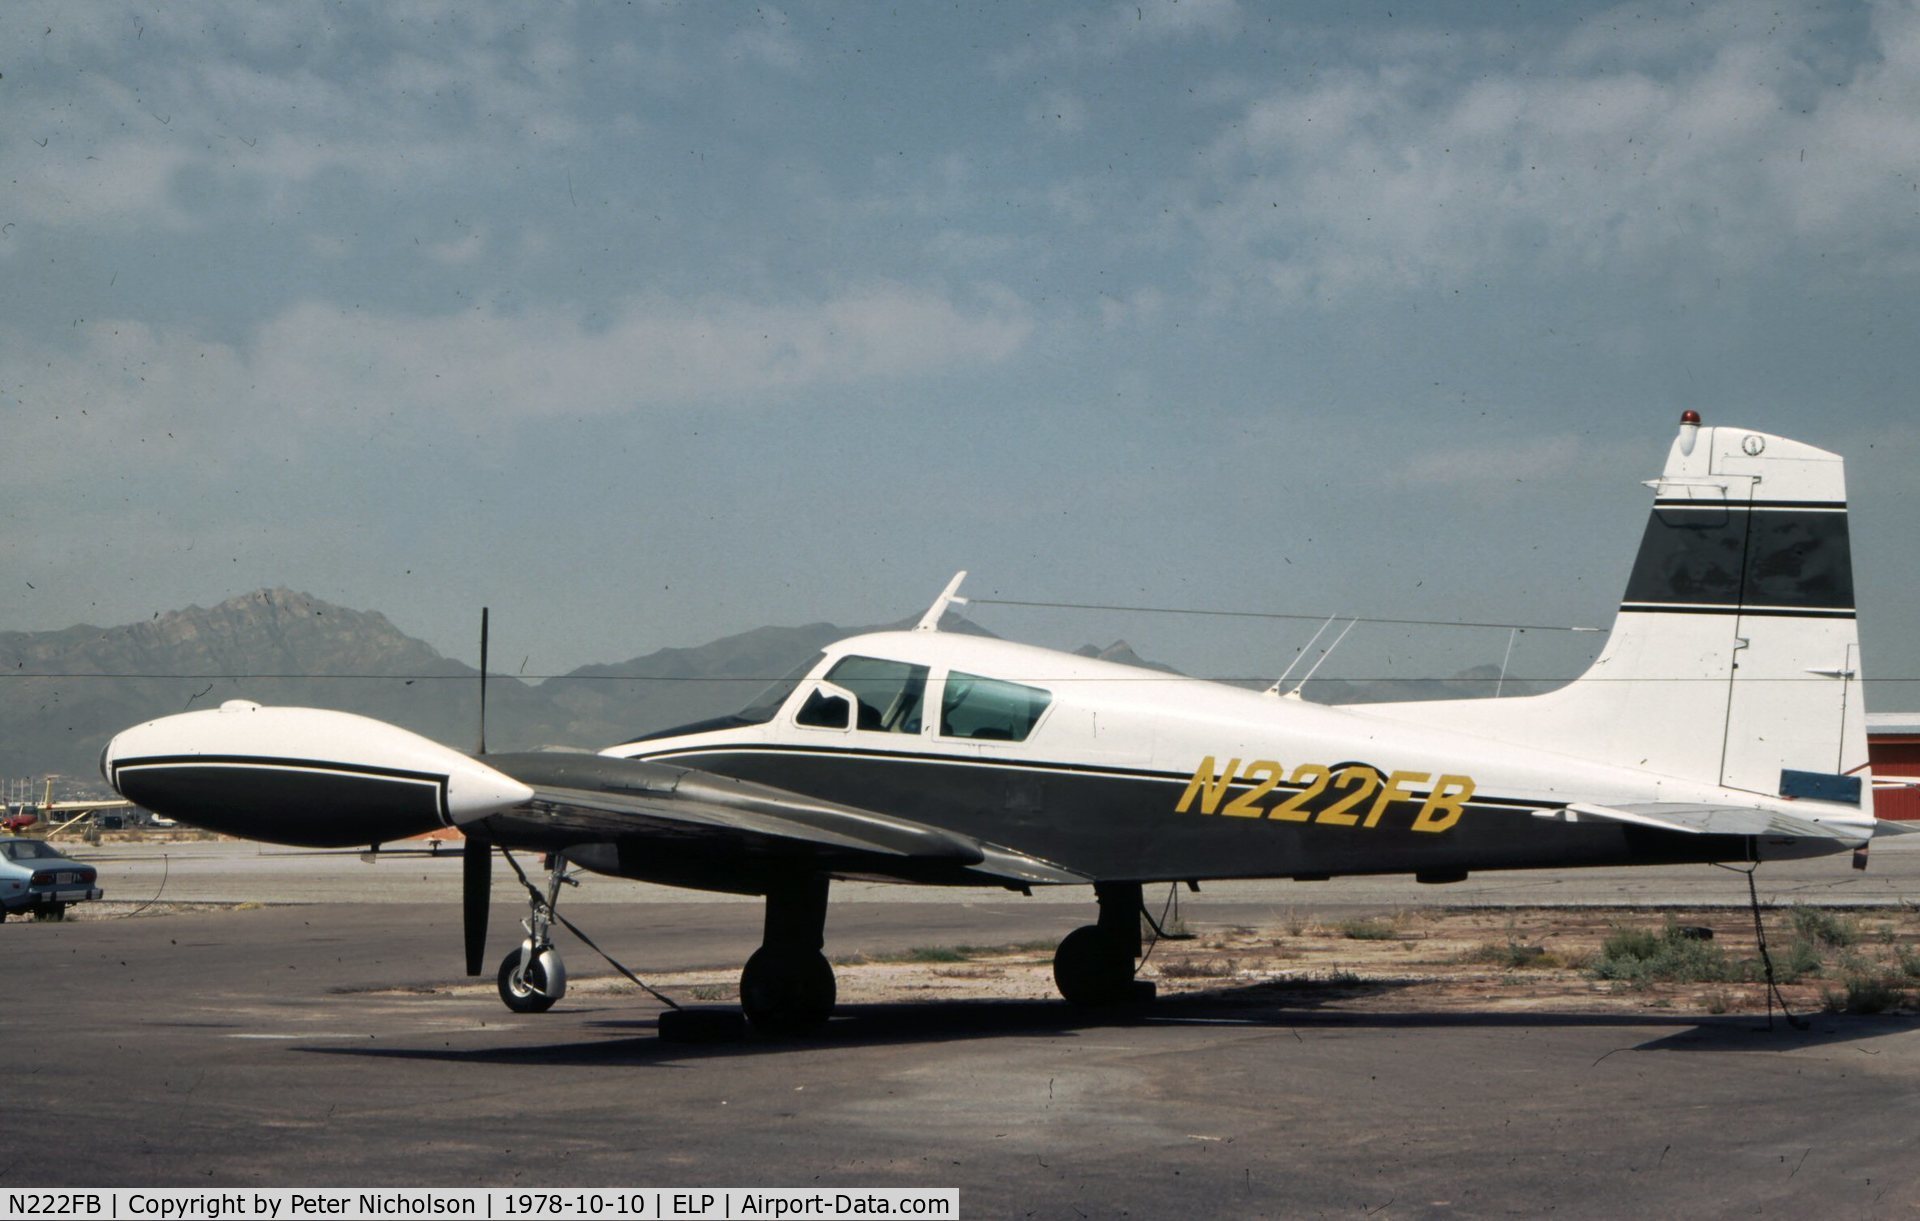 N222FB, 1958 Cessna U-3A Blue Canoe (310A) C/N 38112, This Blue Canoe ex 58-2138 was seen at El Paso in October 1978.